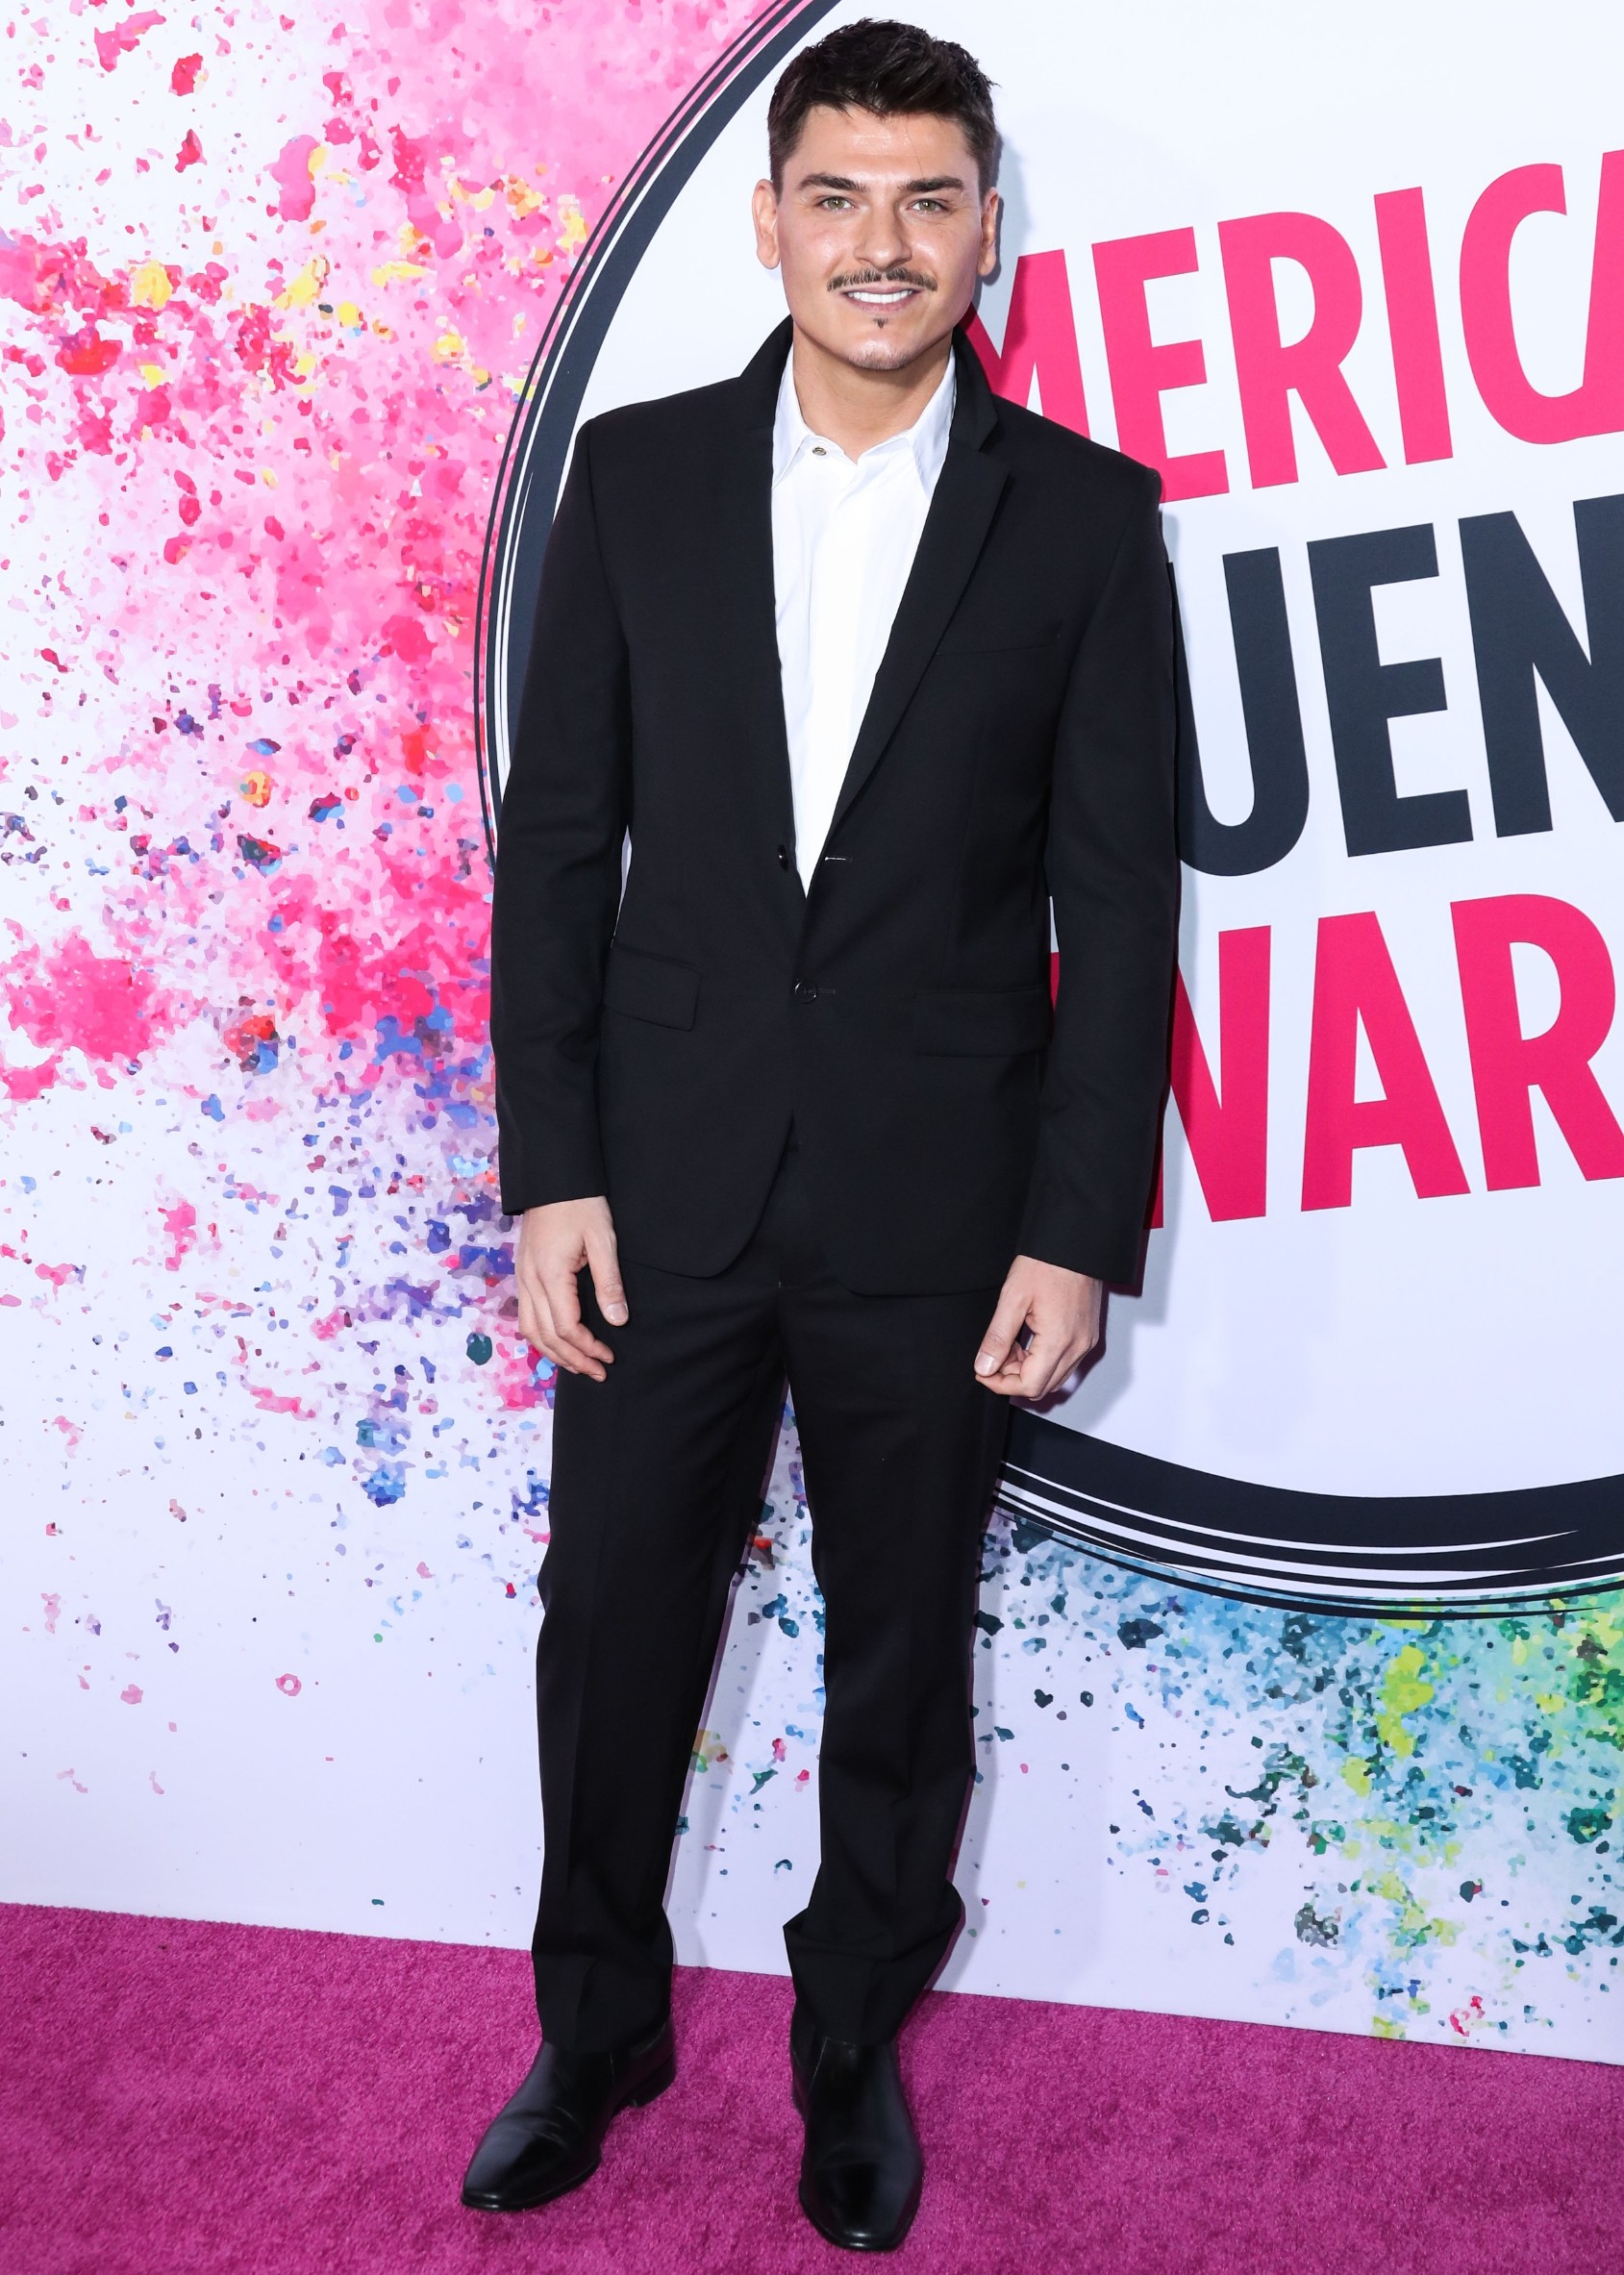 HOLLYWOOD, LOS ANGELES, CALIFORNIA, USA - NOVEMBER 18: Mario Dedivanovic arrives at the 2nd Annual American Influencer Awards 2019 held at the Dolby Theatre on November 18, 2019 in Hollywood, Los Angeles, California, United States.,Image: 483647561, License: Rights-managed, Restrictions: *** Australia Out ***, Model Release: no, Credit line: Image Press Agency / ddp USA / Profimedia